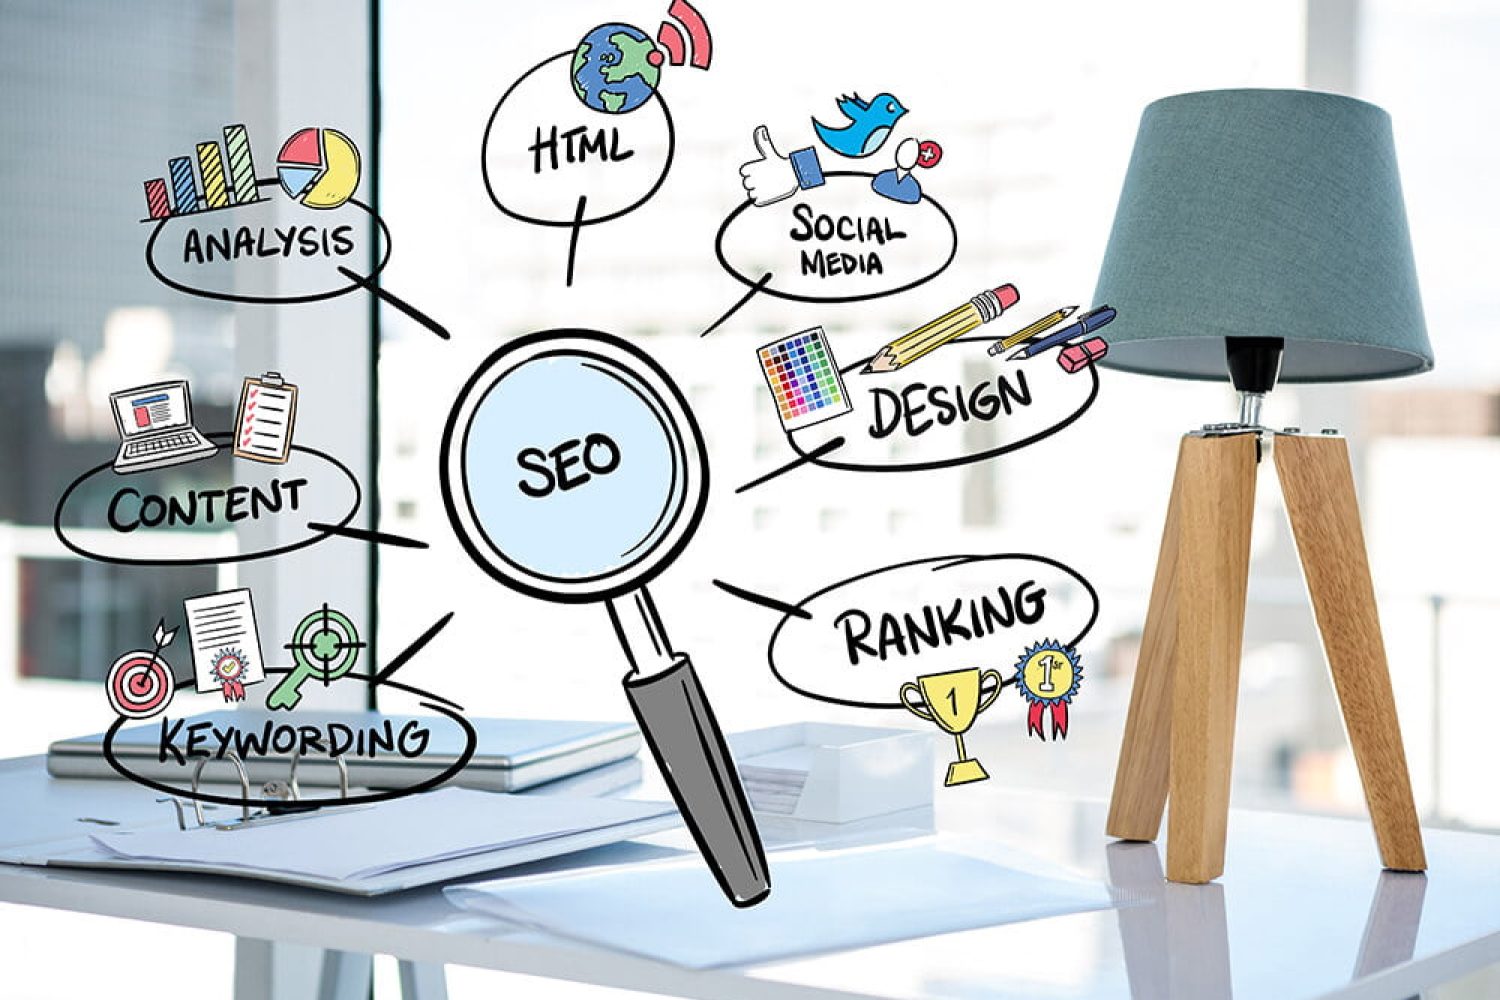 Search Engine Optimization Services - SEO - Digital Marketing Services in Dubai by AWD Tech Solutions